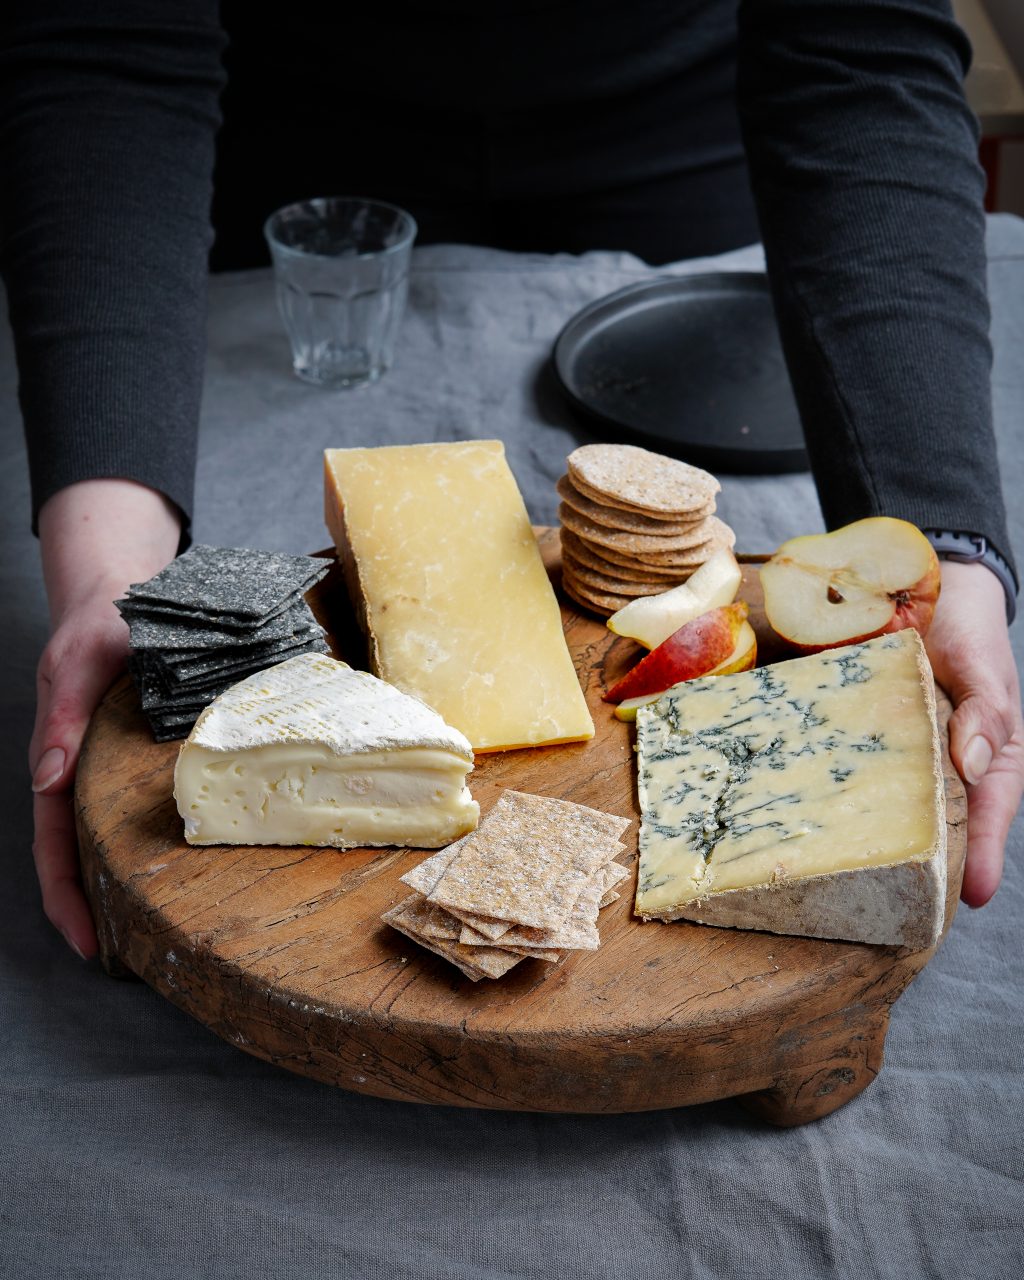 How to create #cheeseboardmoments during isolation | Peter's Yard